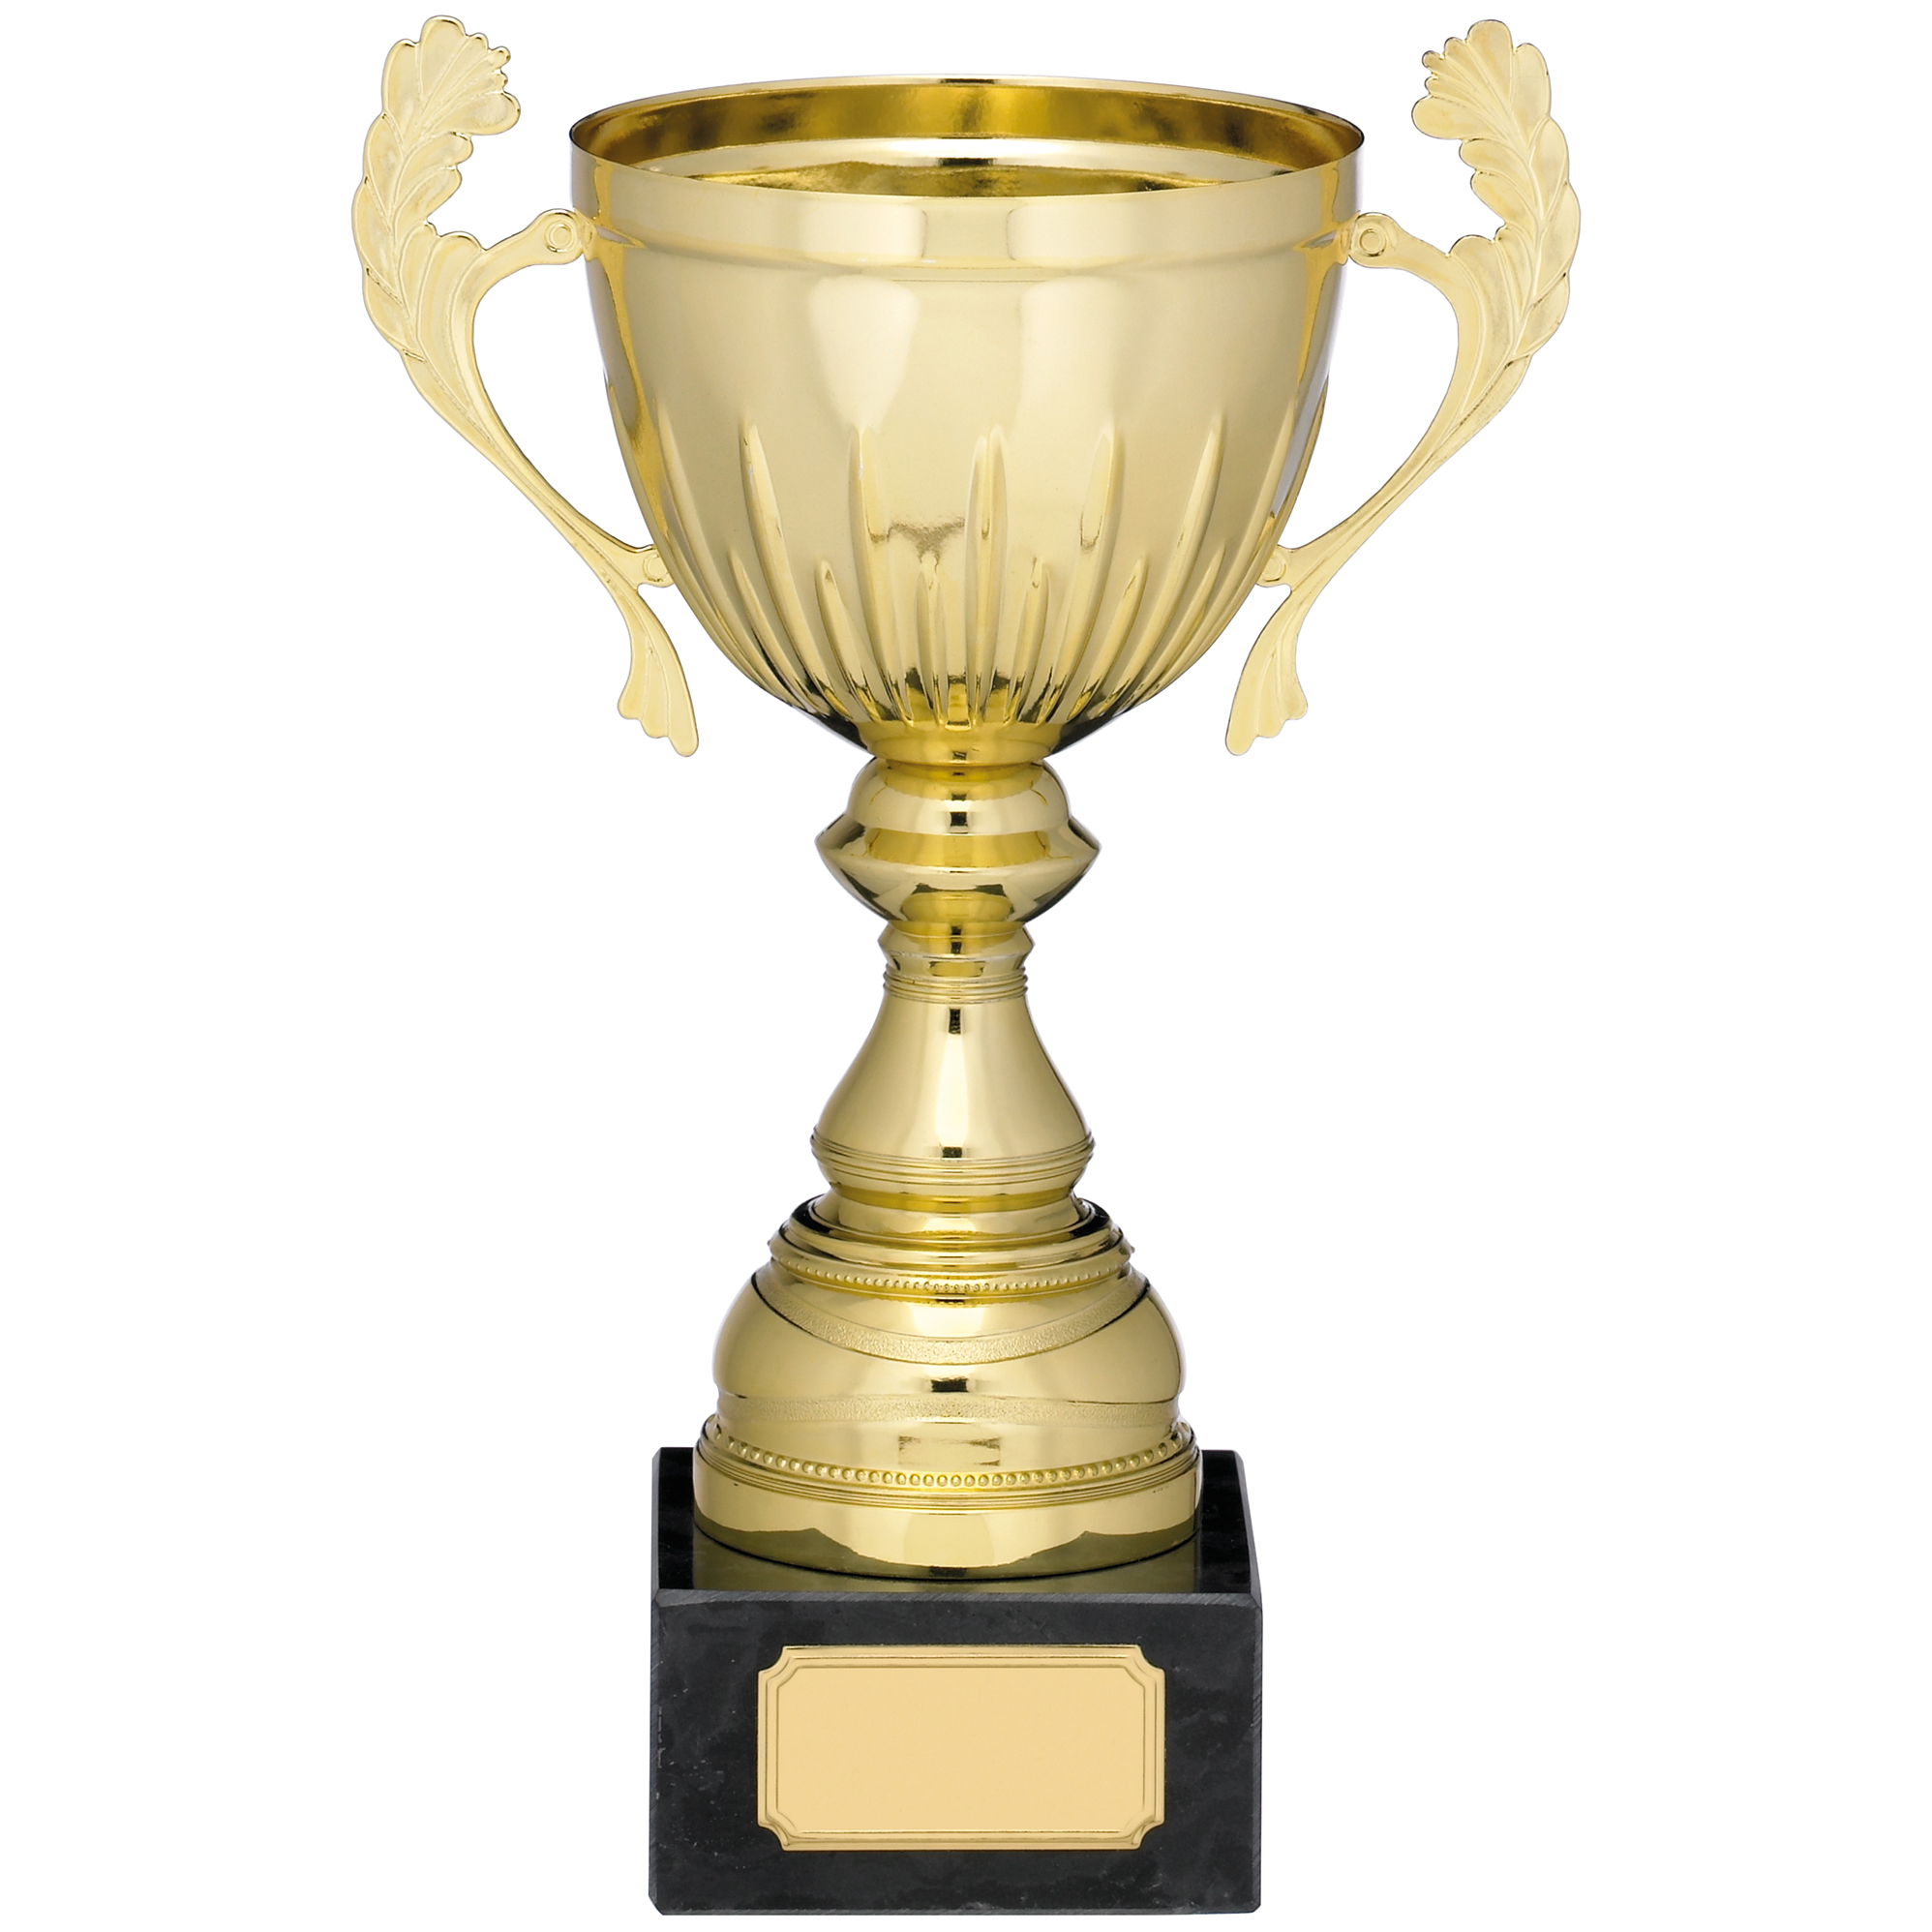 27cm GOLD CUP TROPHY WITH HANDLES